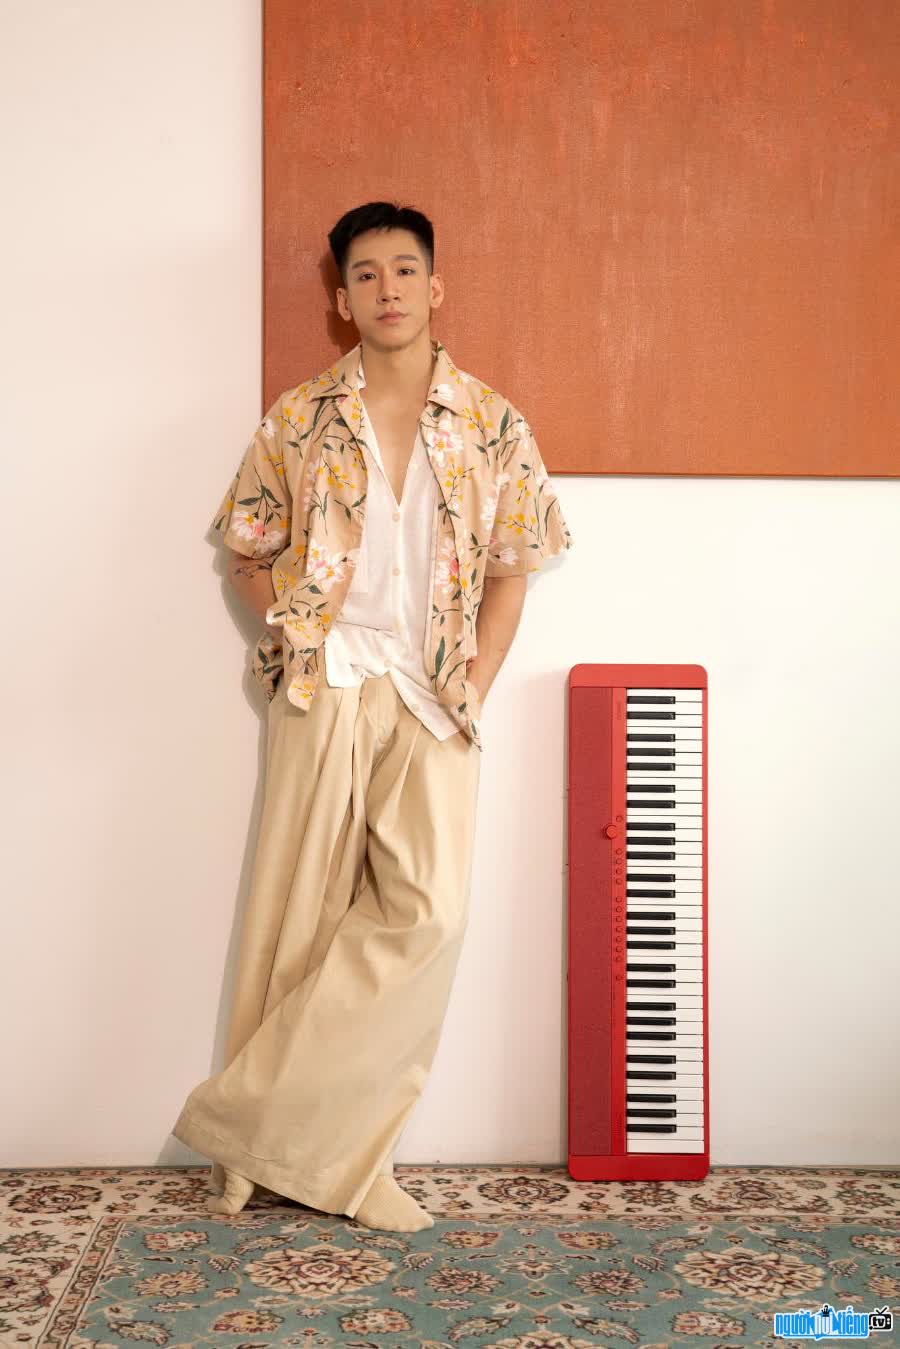 New image of musician Minh Min